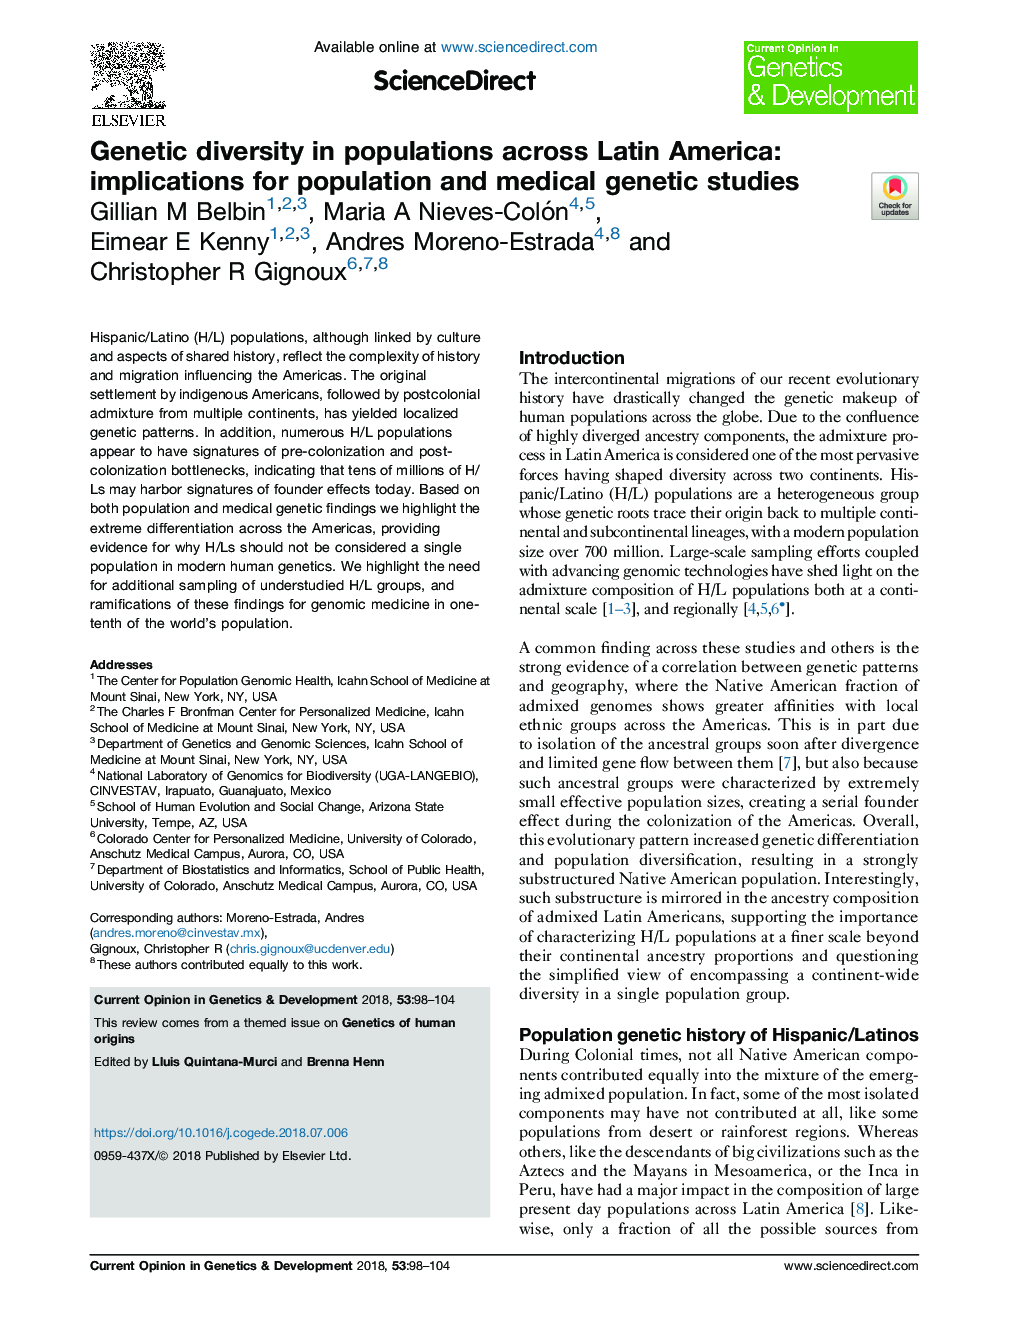 Genetic diversity in populations across Latin America: implications for population and medical genetic studies